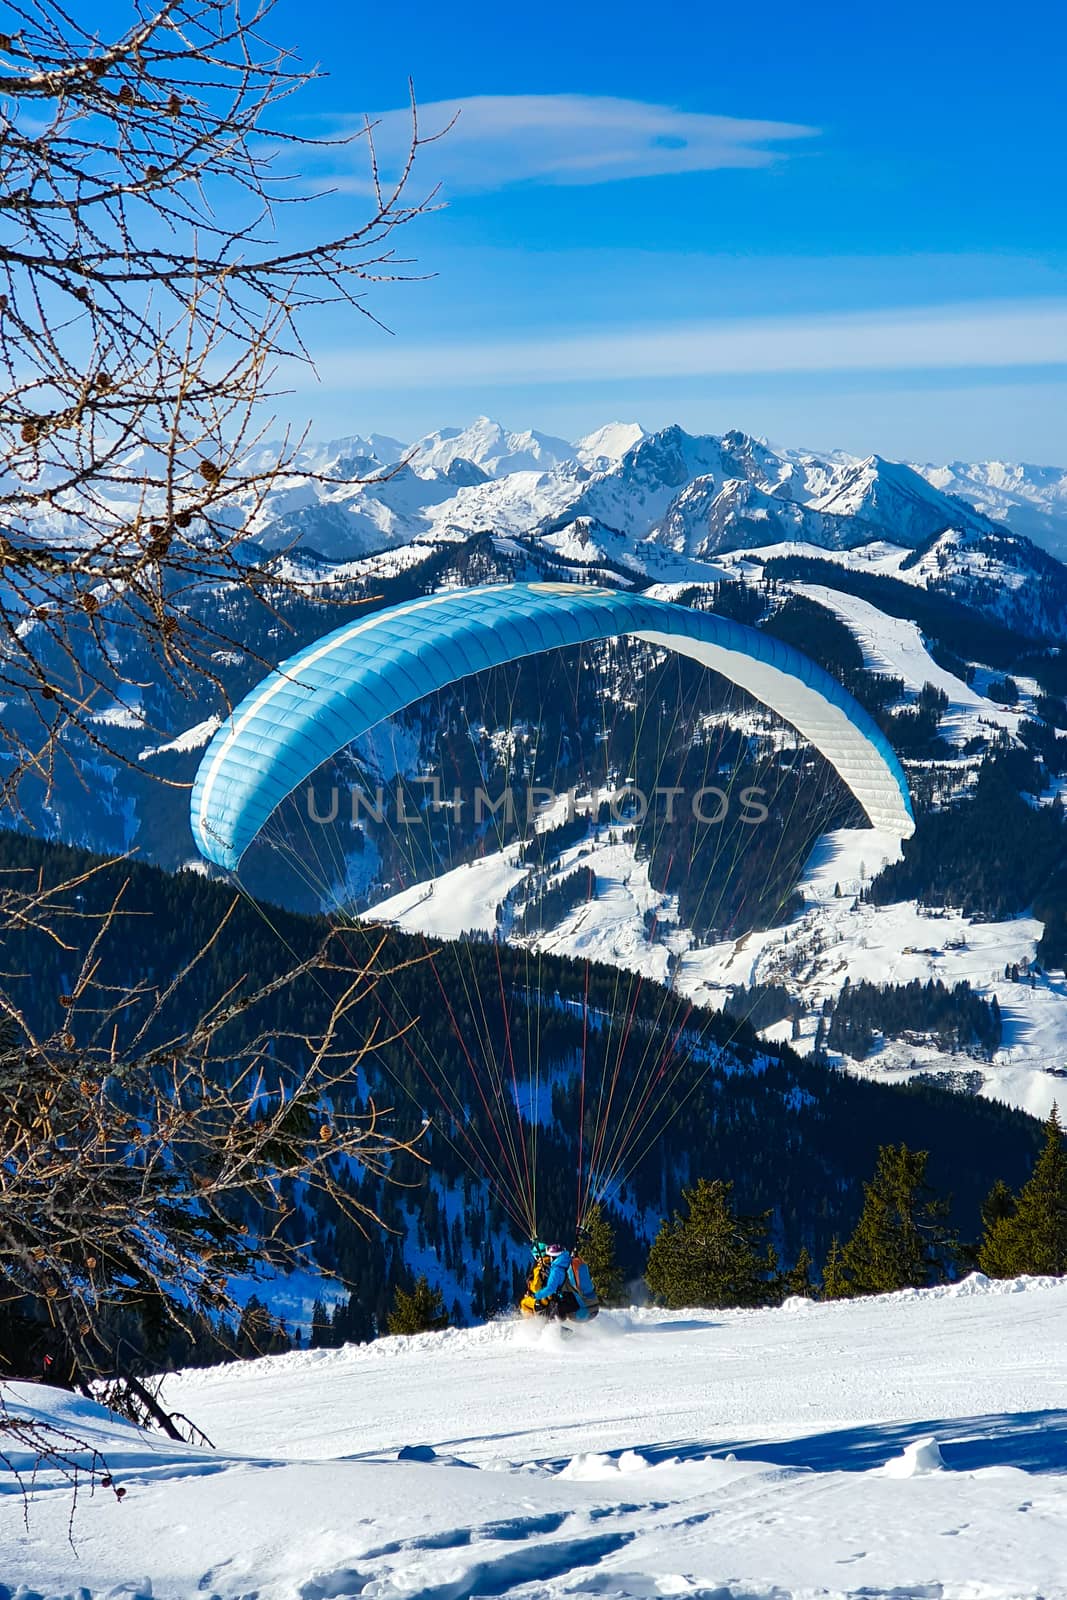 Paragliding Off Snowy Mountains by TheDutchcowboy